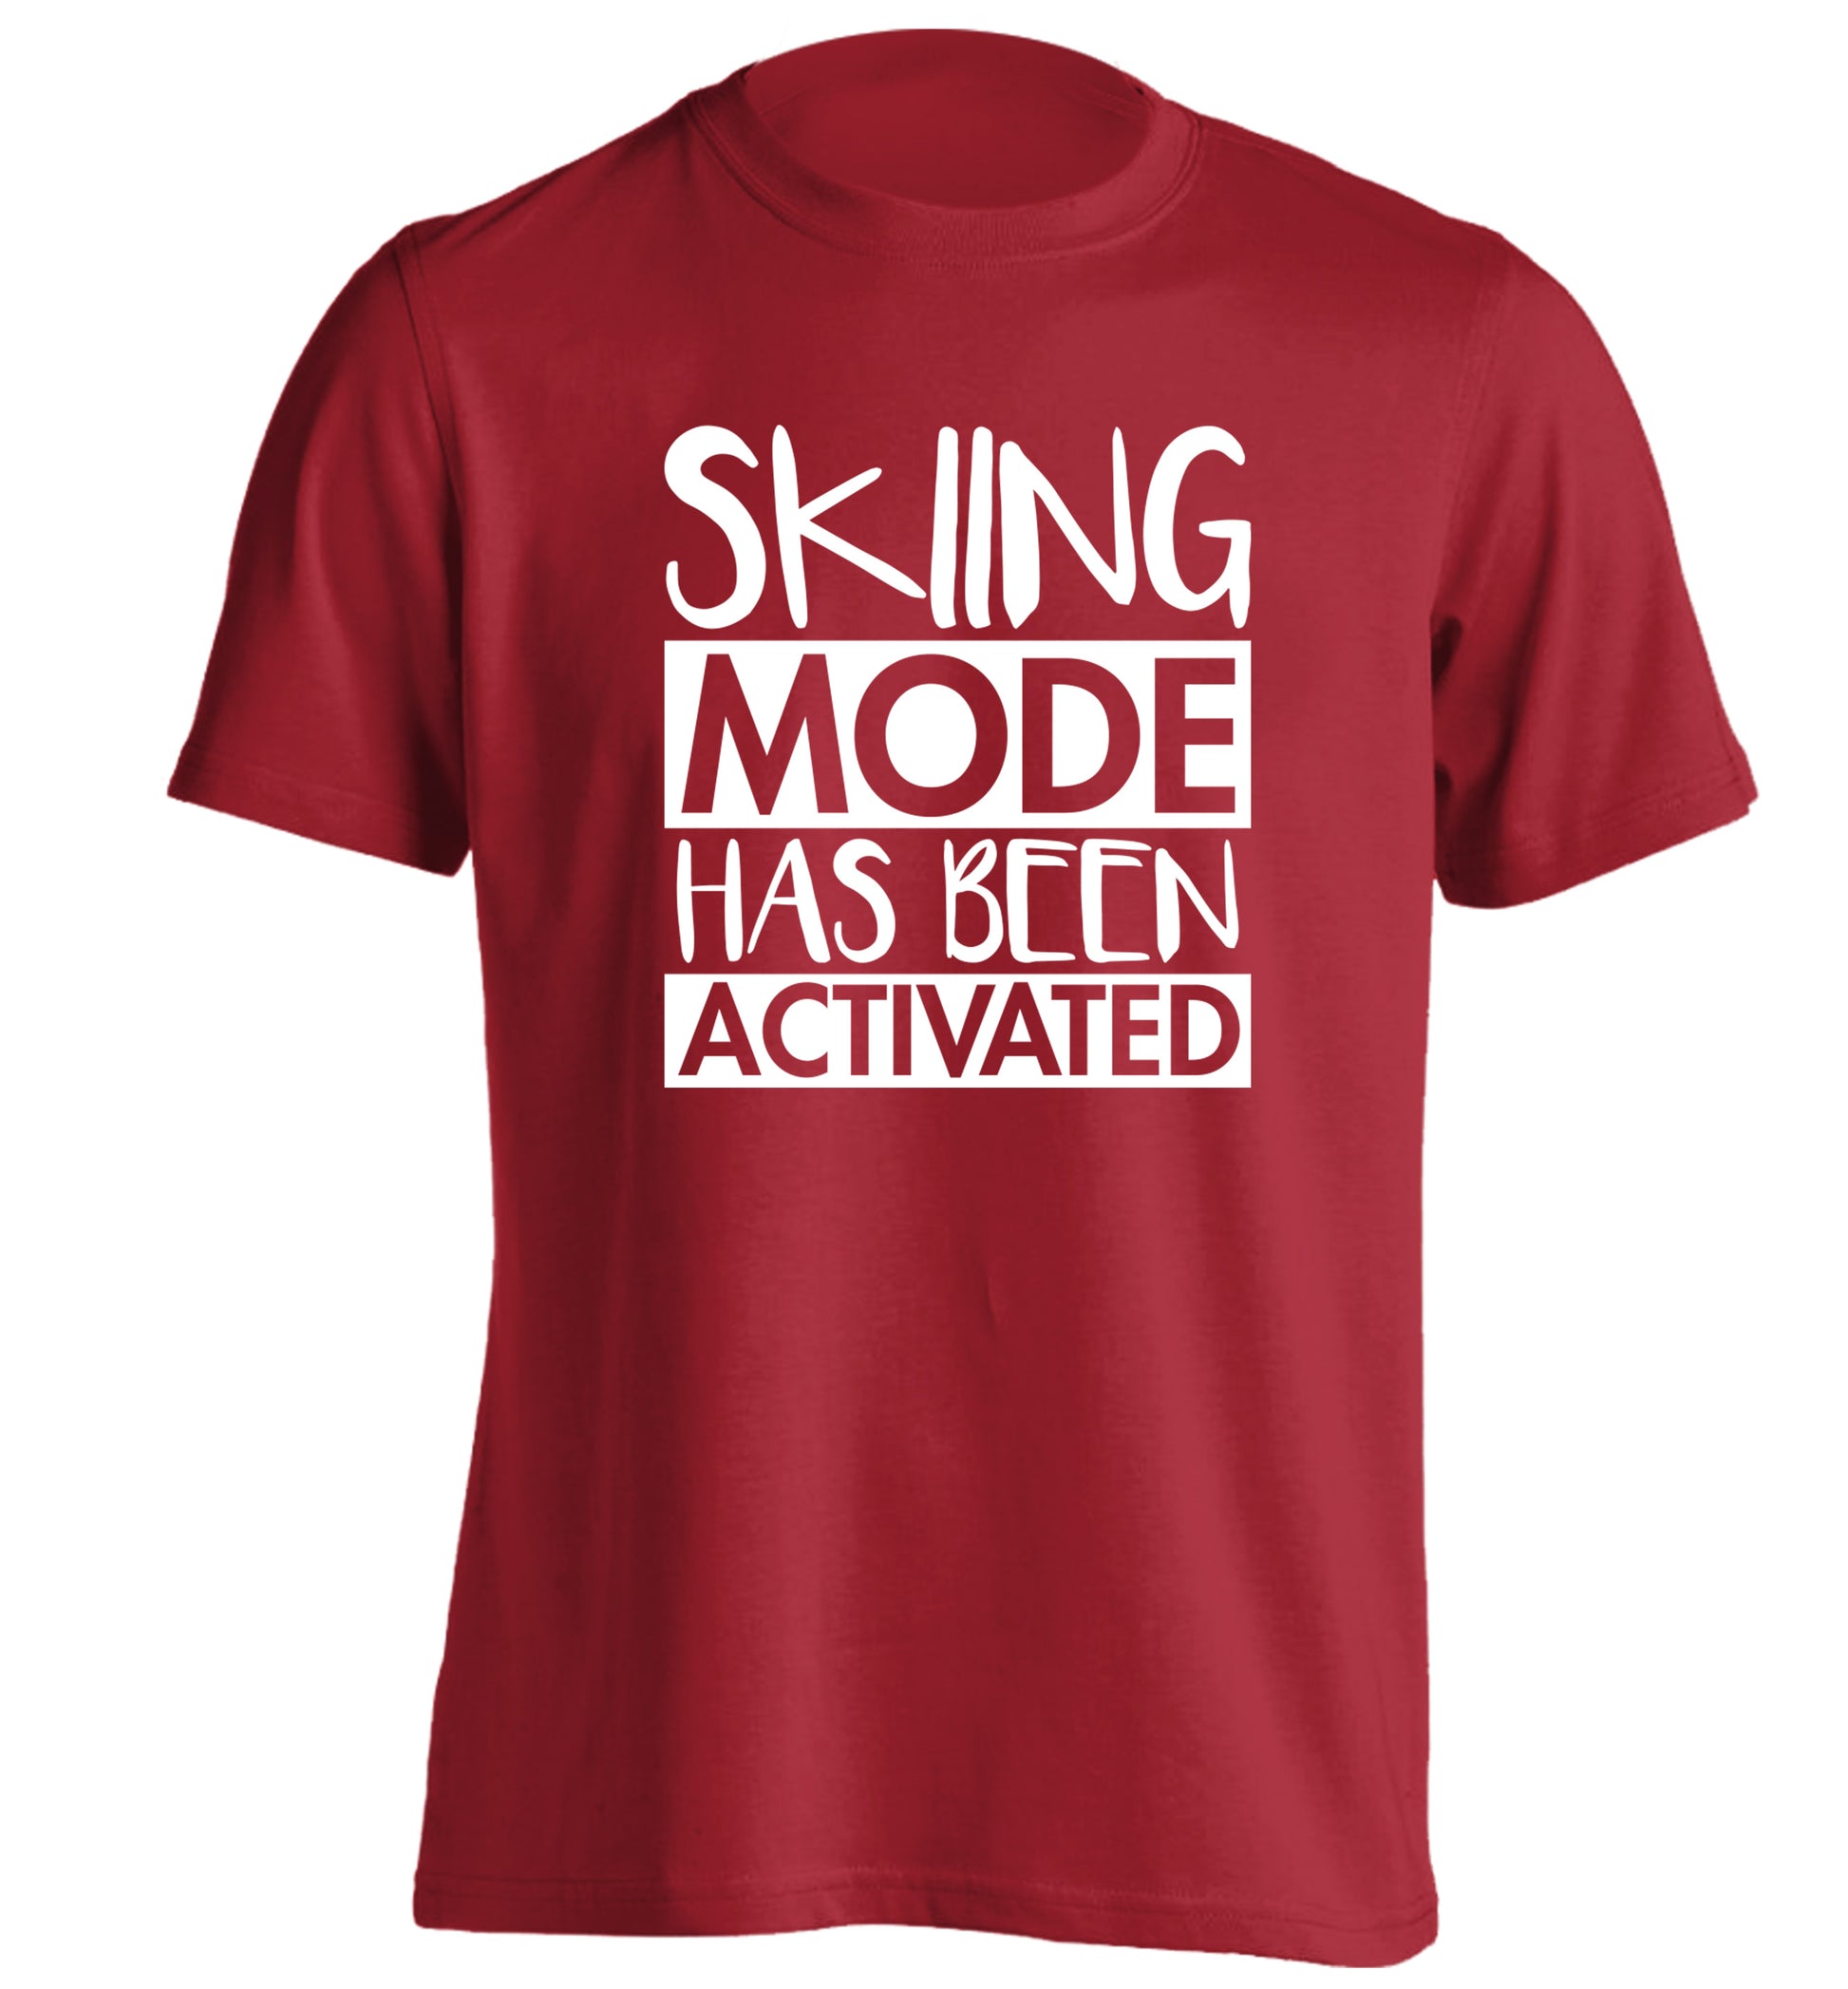 Skiing mode activated adults unisexred Tshirt 2XL